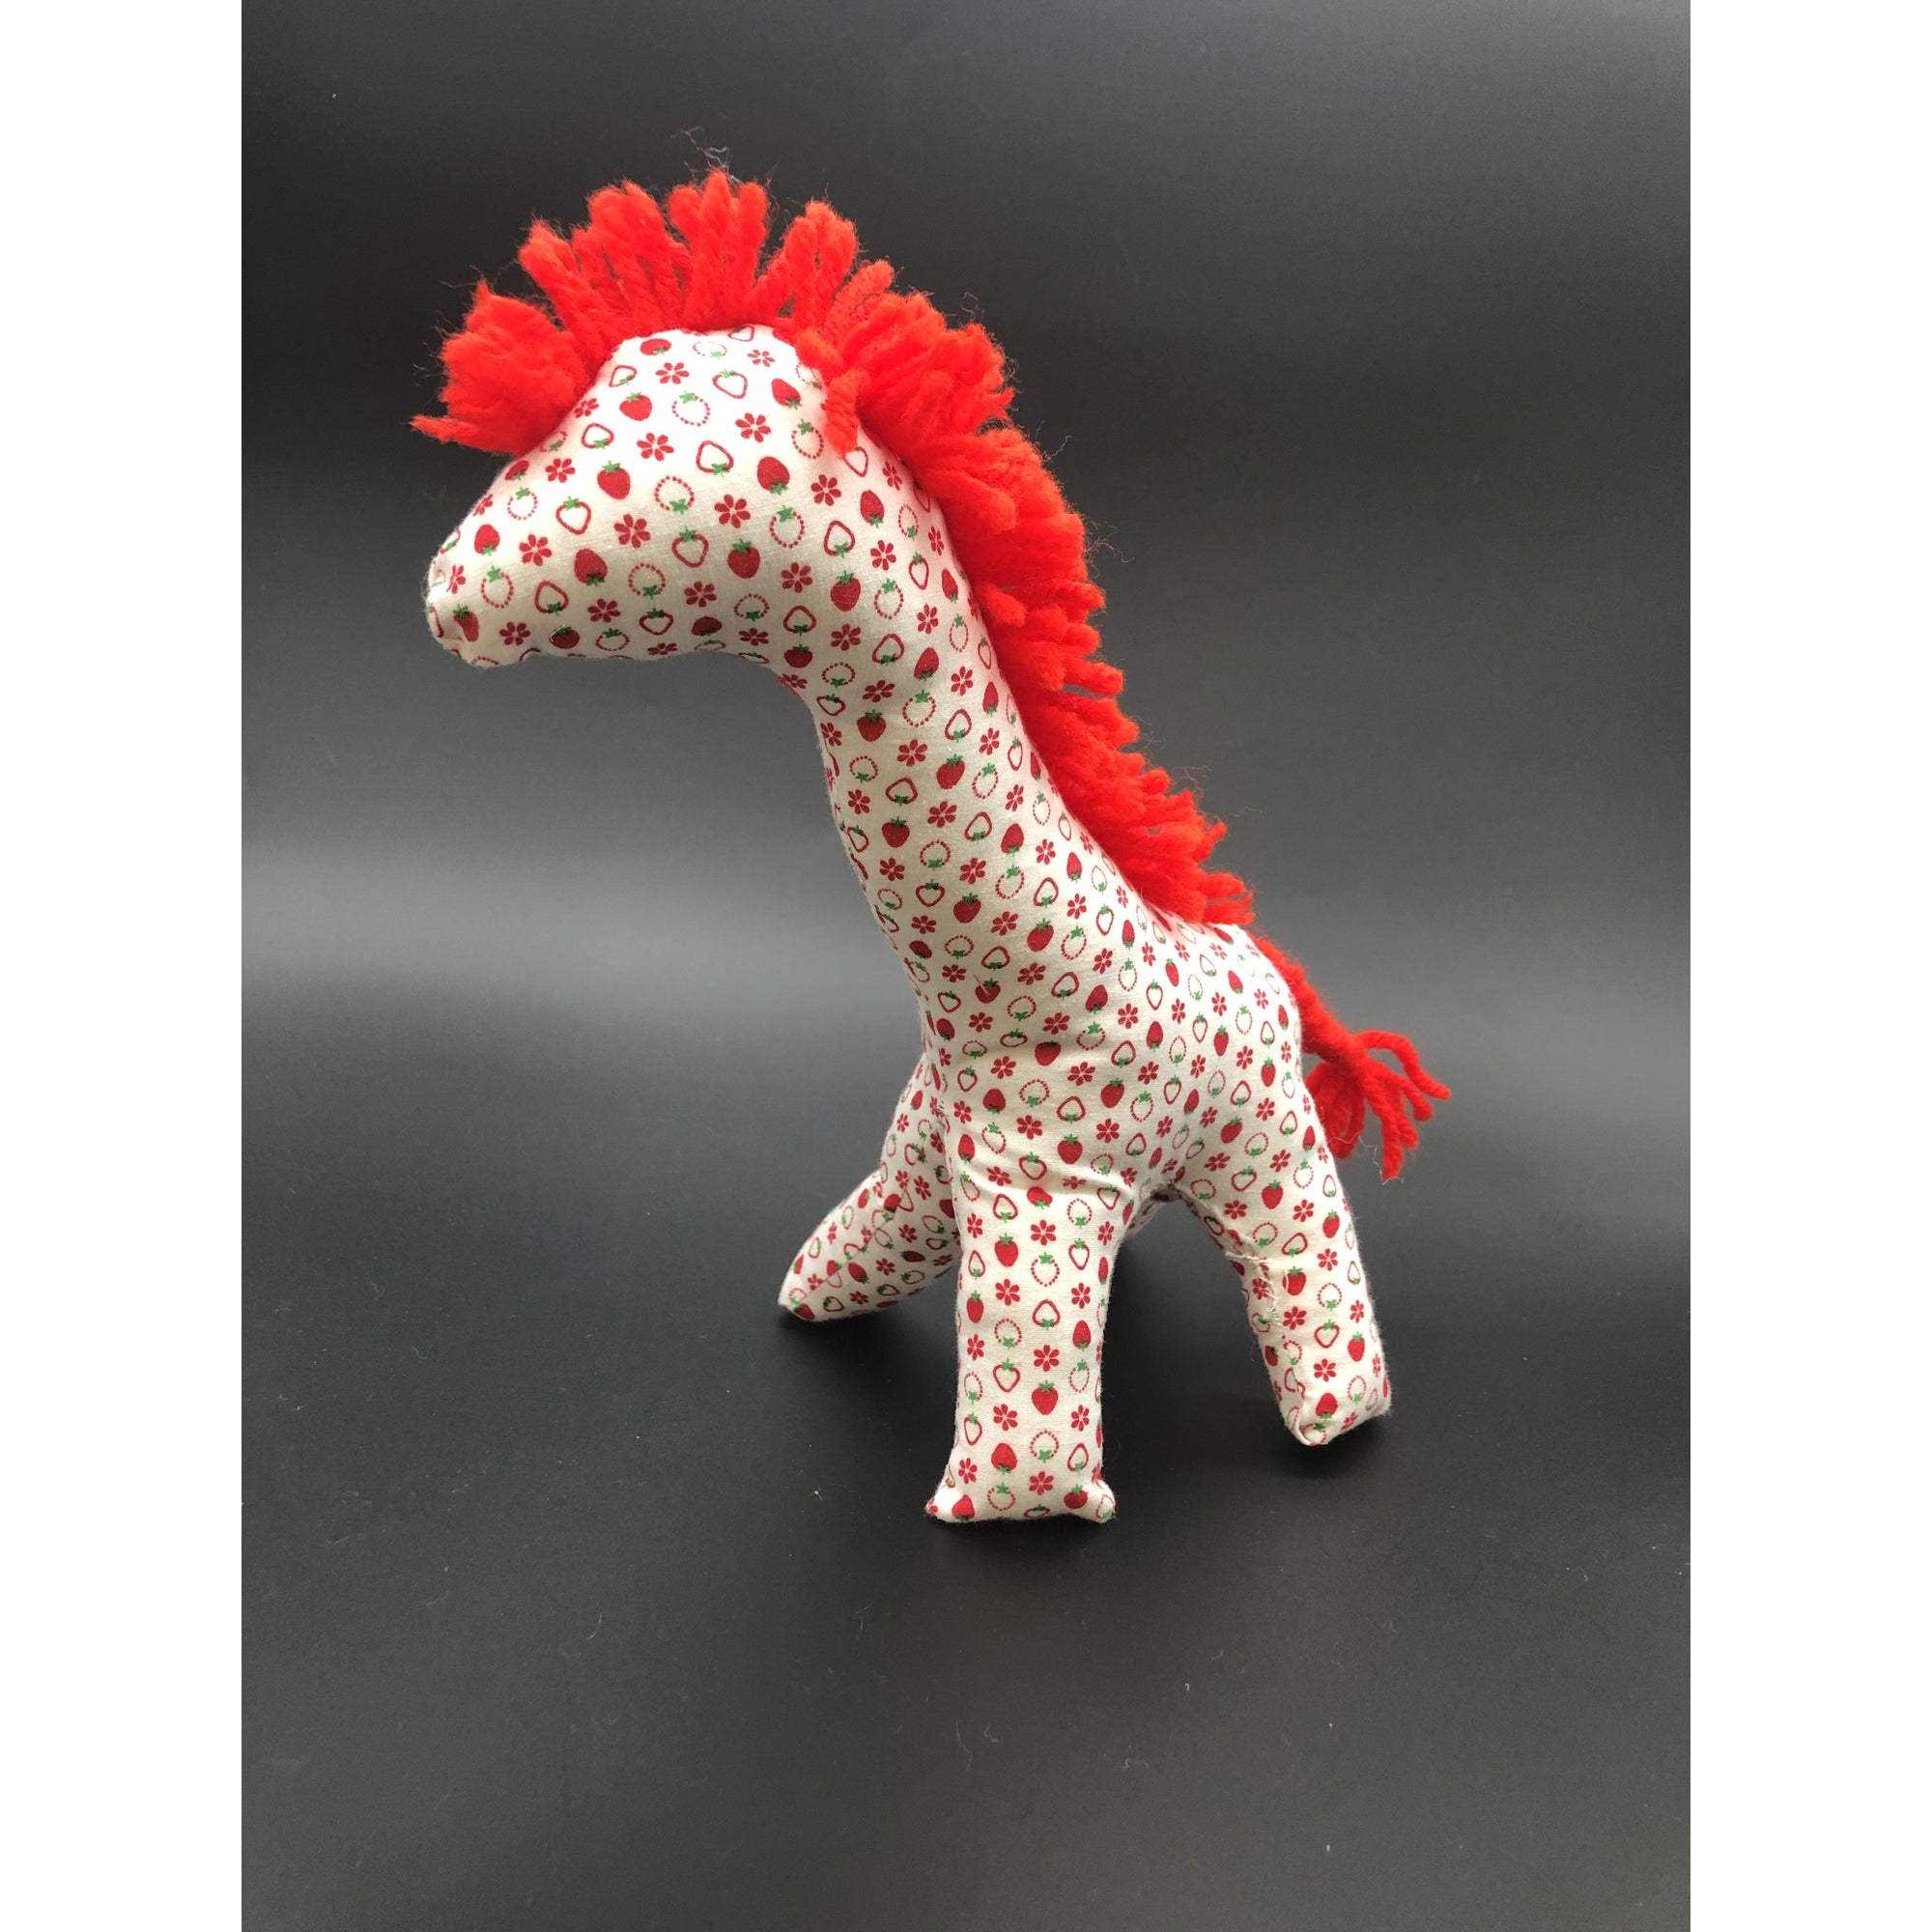 Giraffe white with red strawberries and flowers